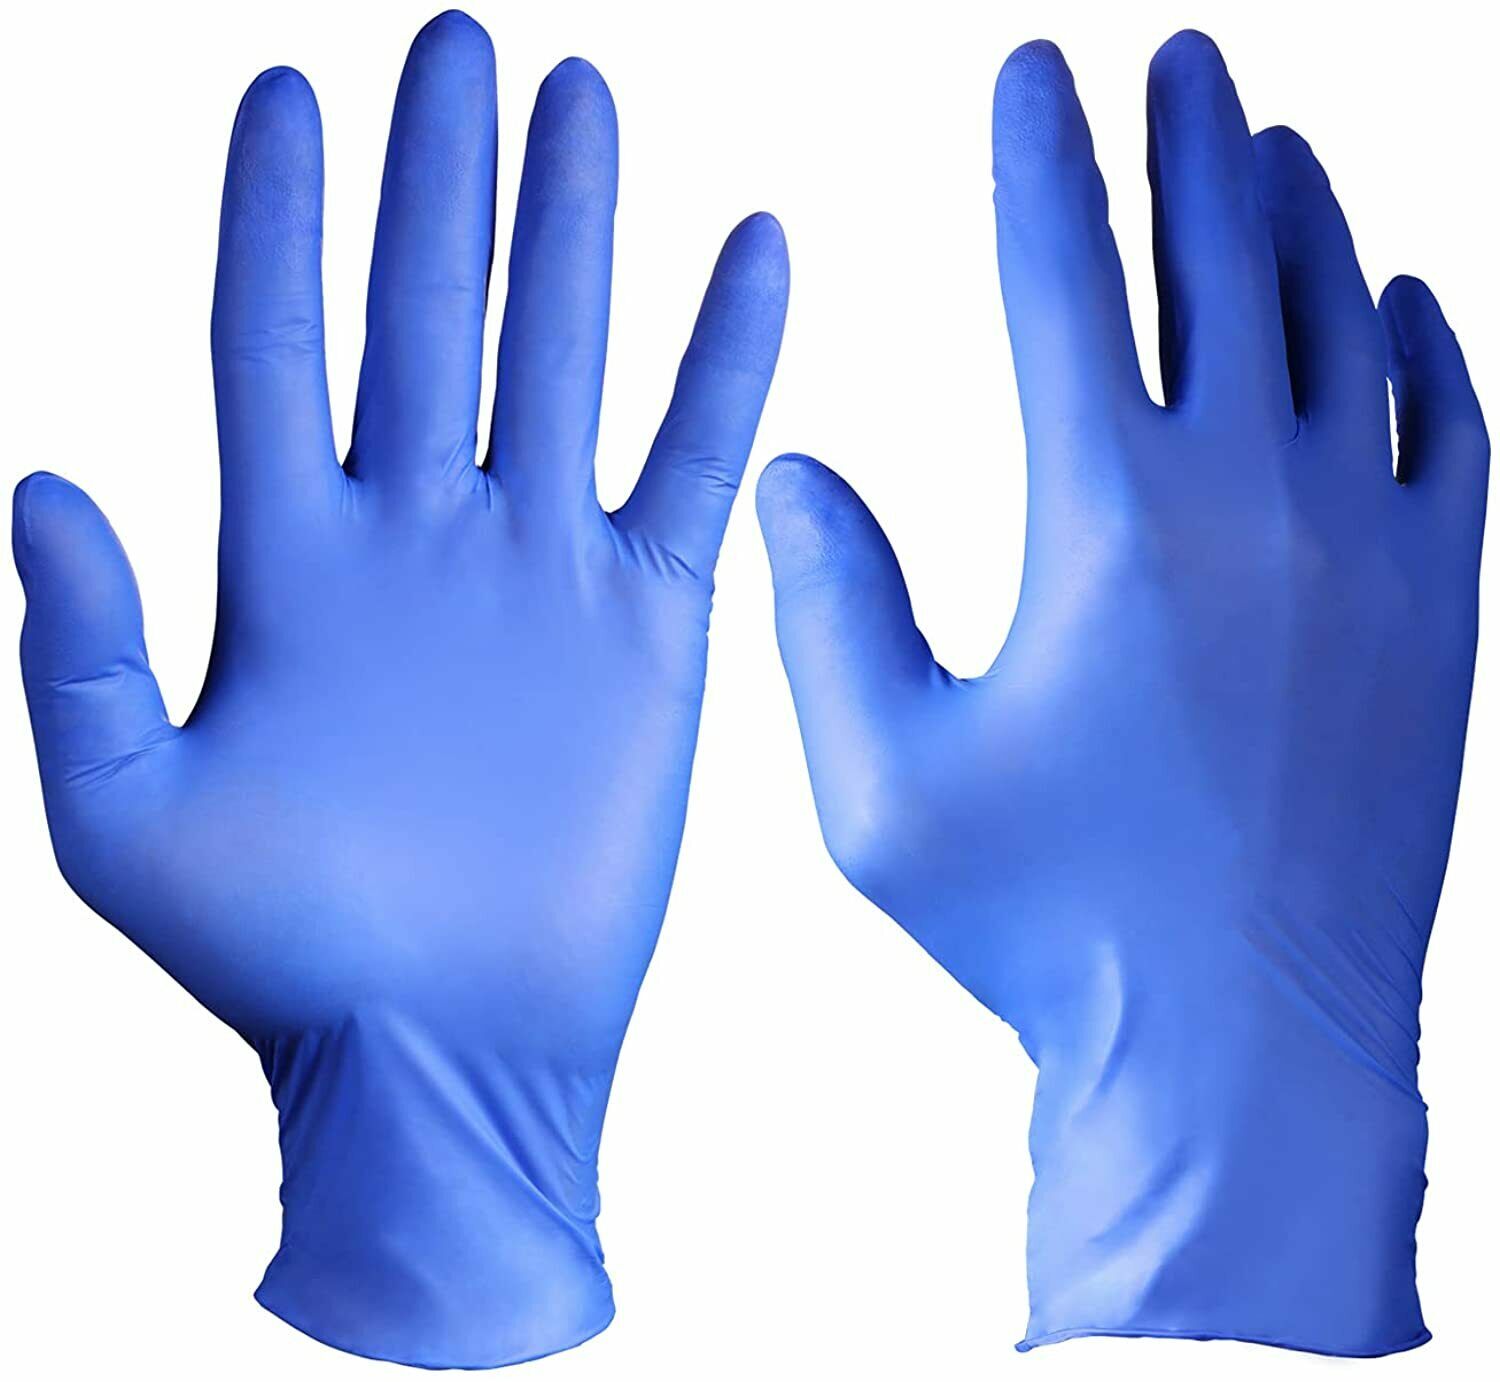 Peipu Nitrile And Vinyl Blend Material Disposable Gloves(100pcs)